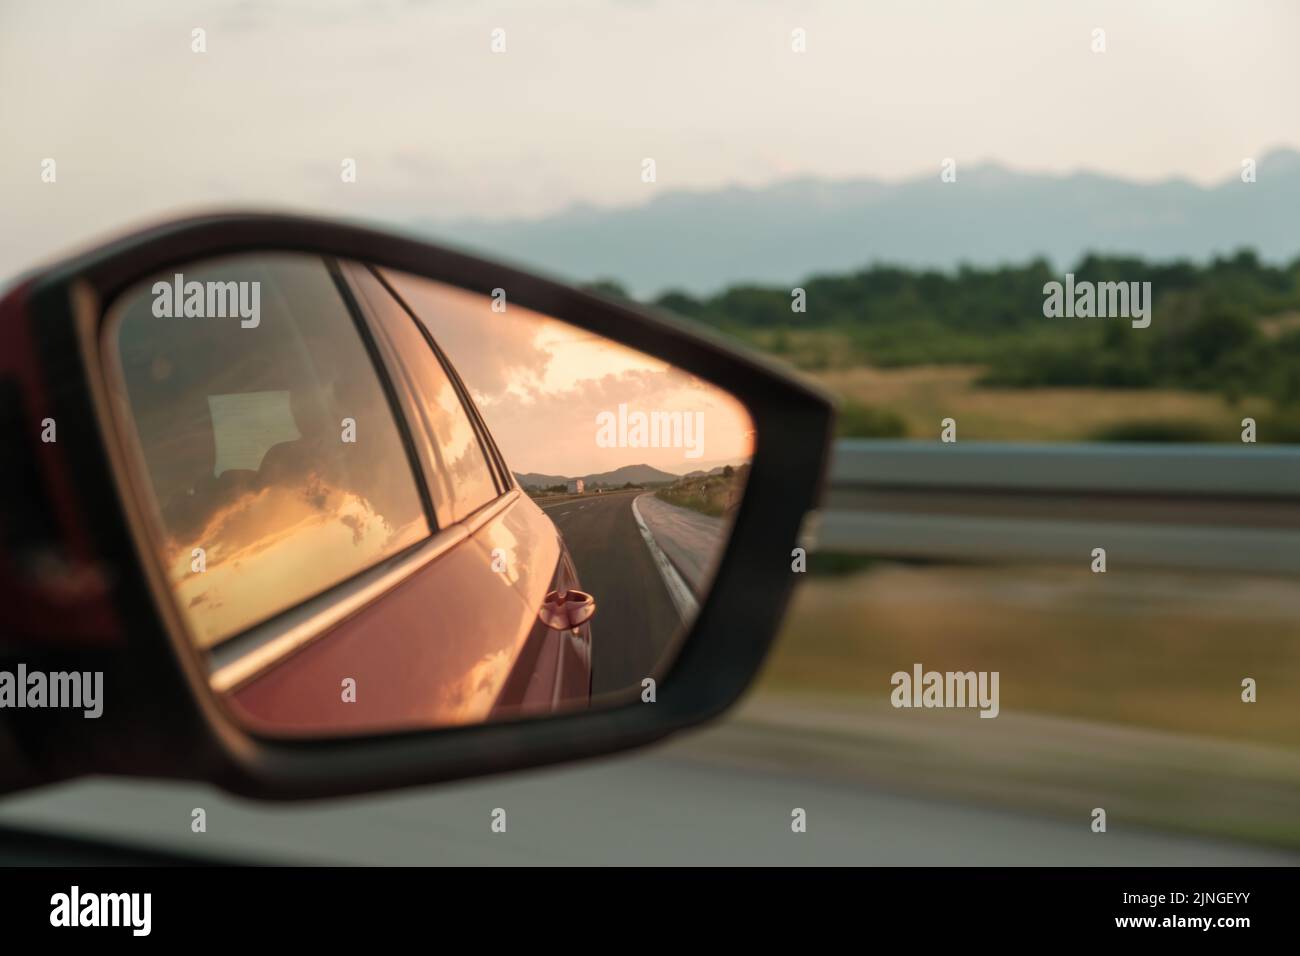 Red car drives past hilly landscape. Rear-view mirror shows roadway behind vehicle and door glass reflects sunset sky closeup Stock Photo